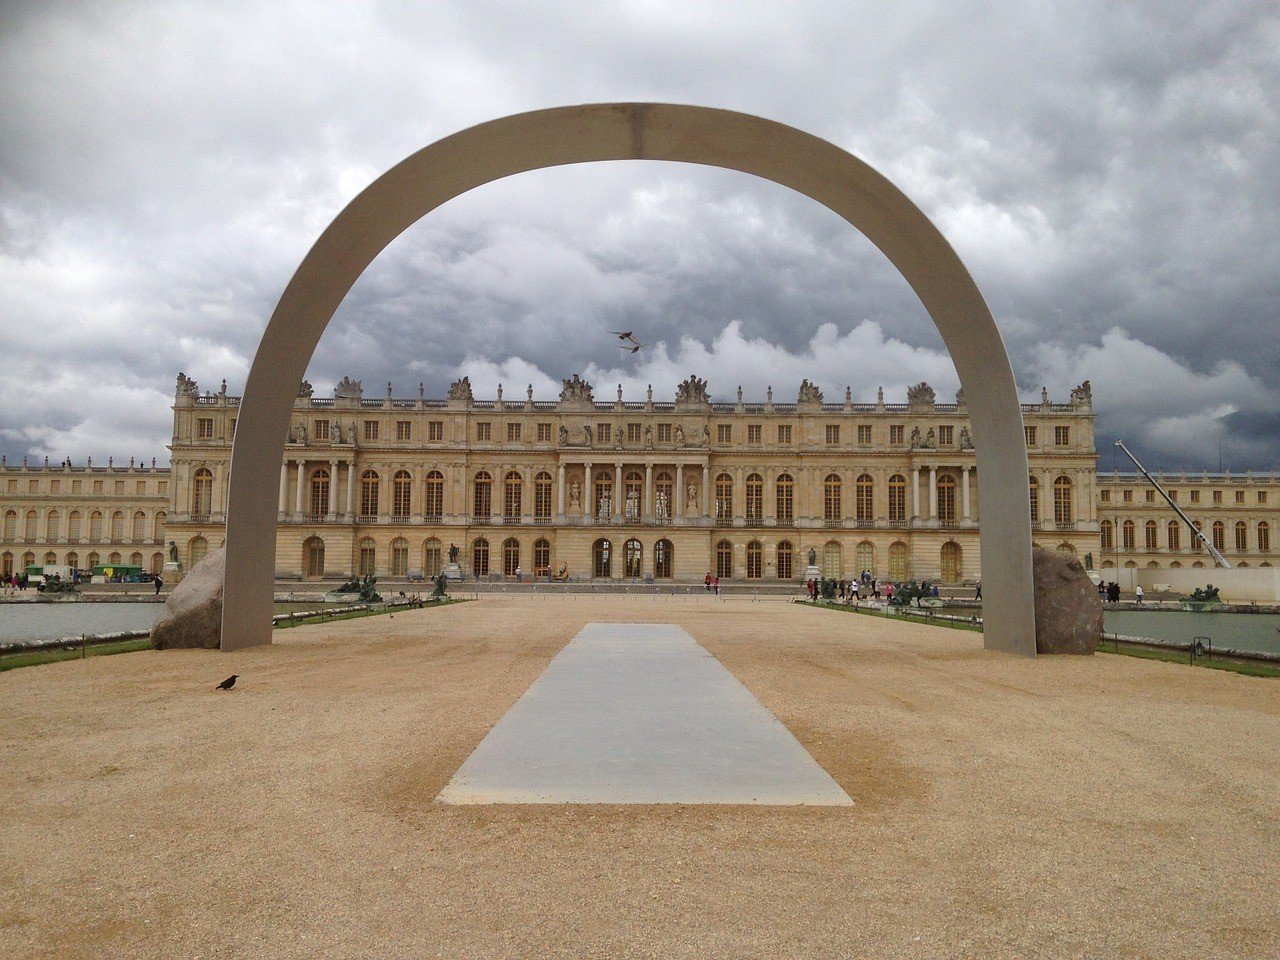 Palace of Versailles - A very cool place in Paris to go for a day